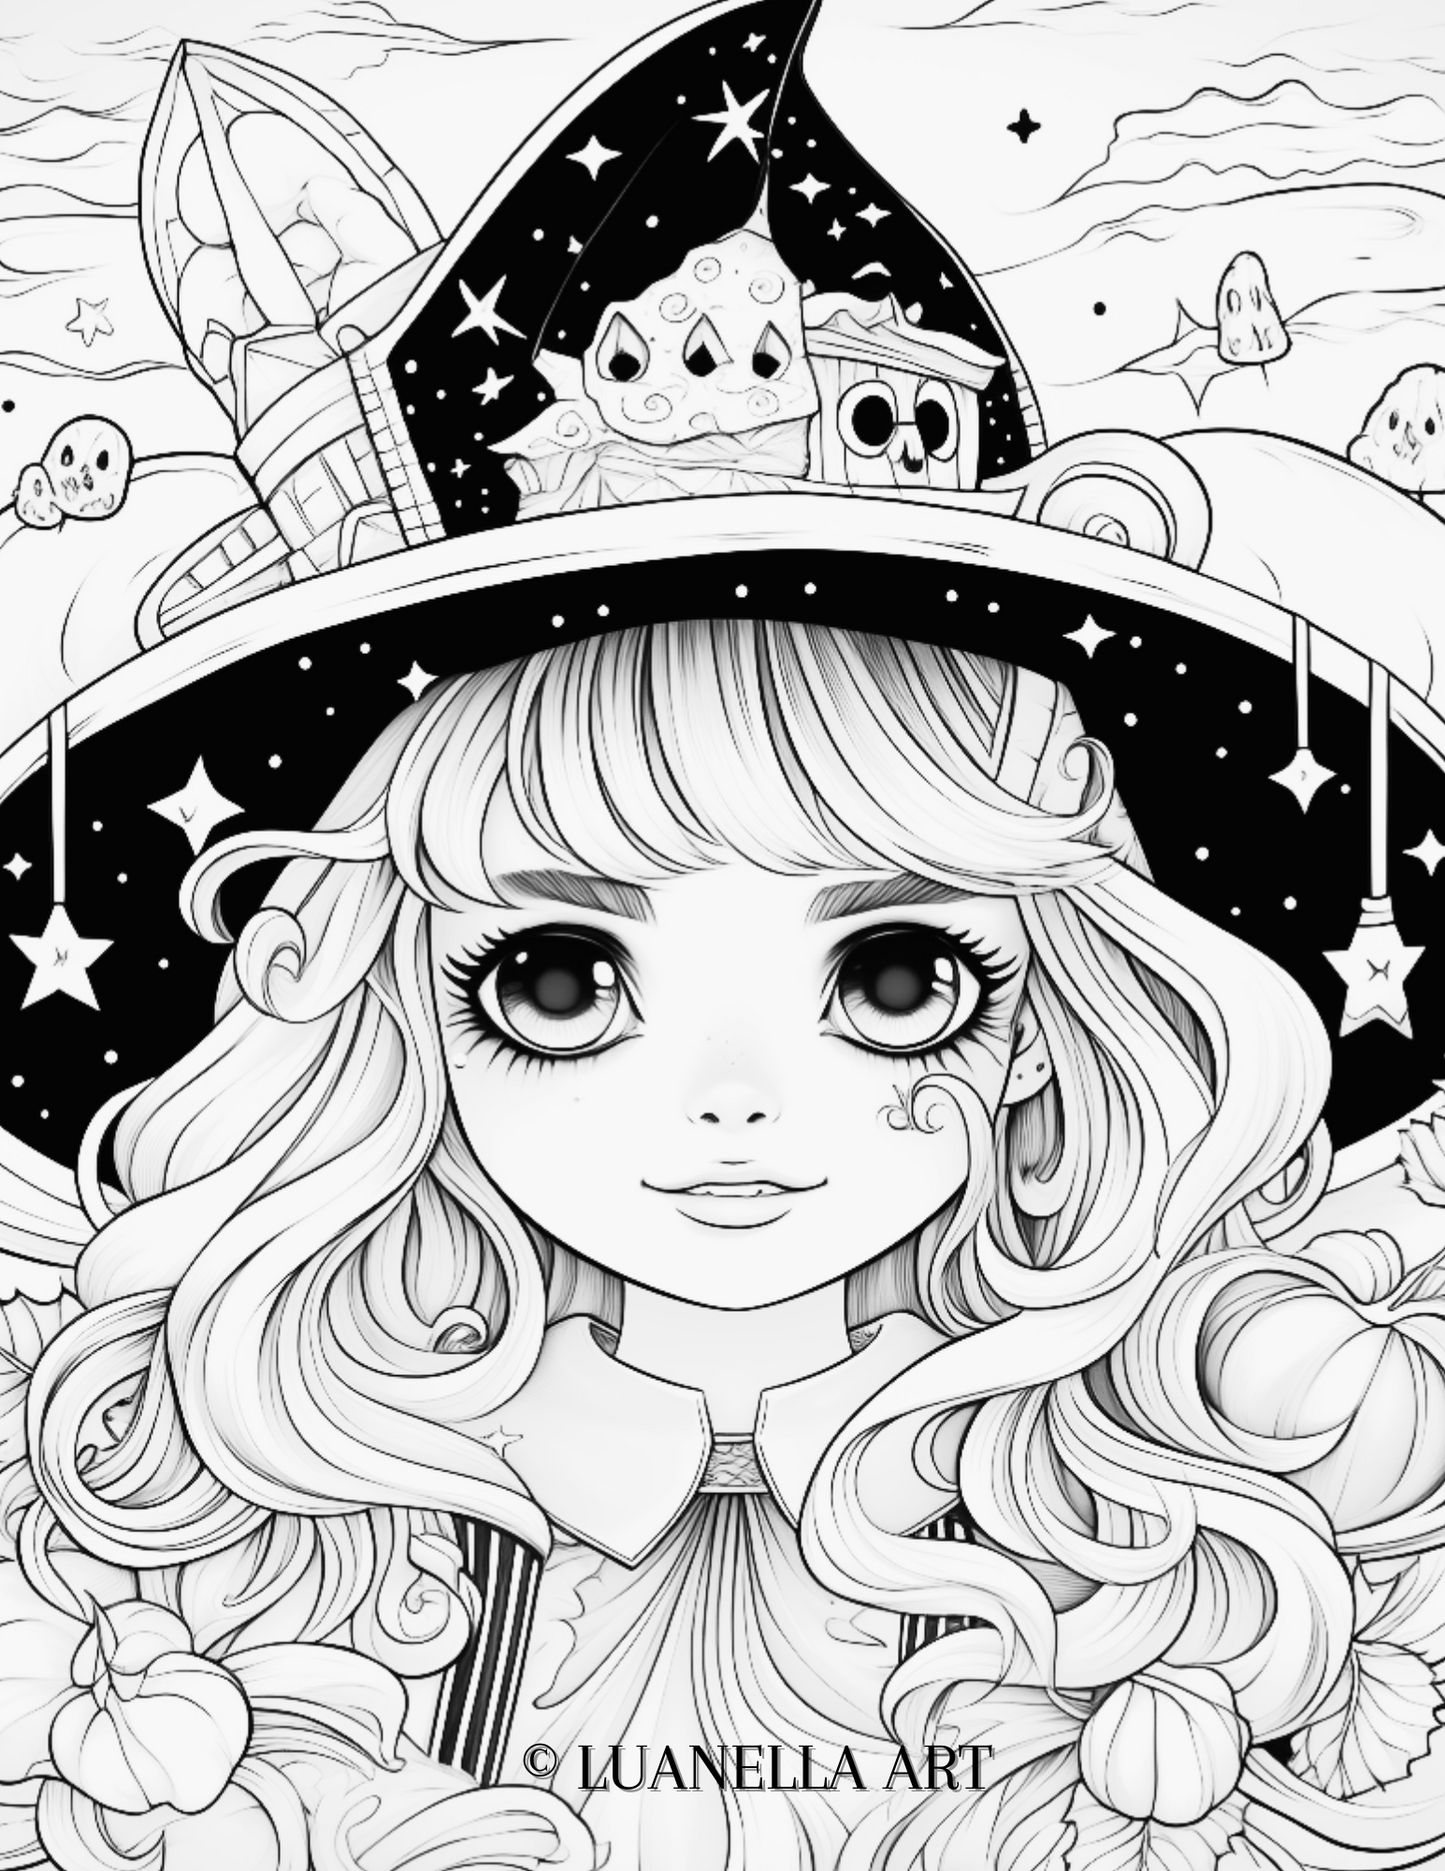 Cute Witch with original hat | Coloring Page | Instant Digital Download